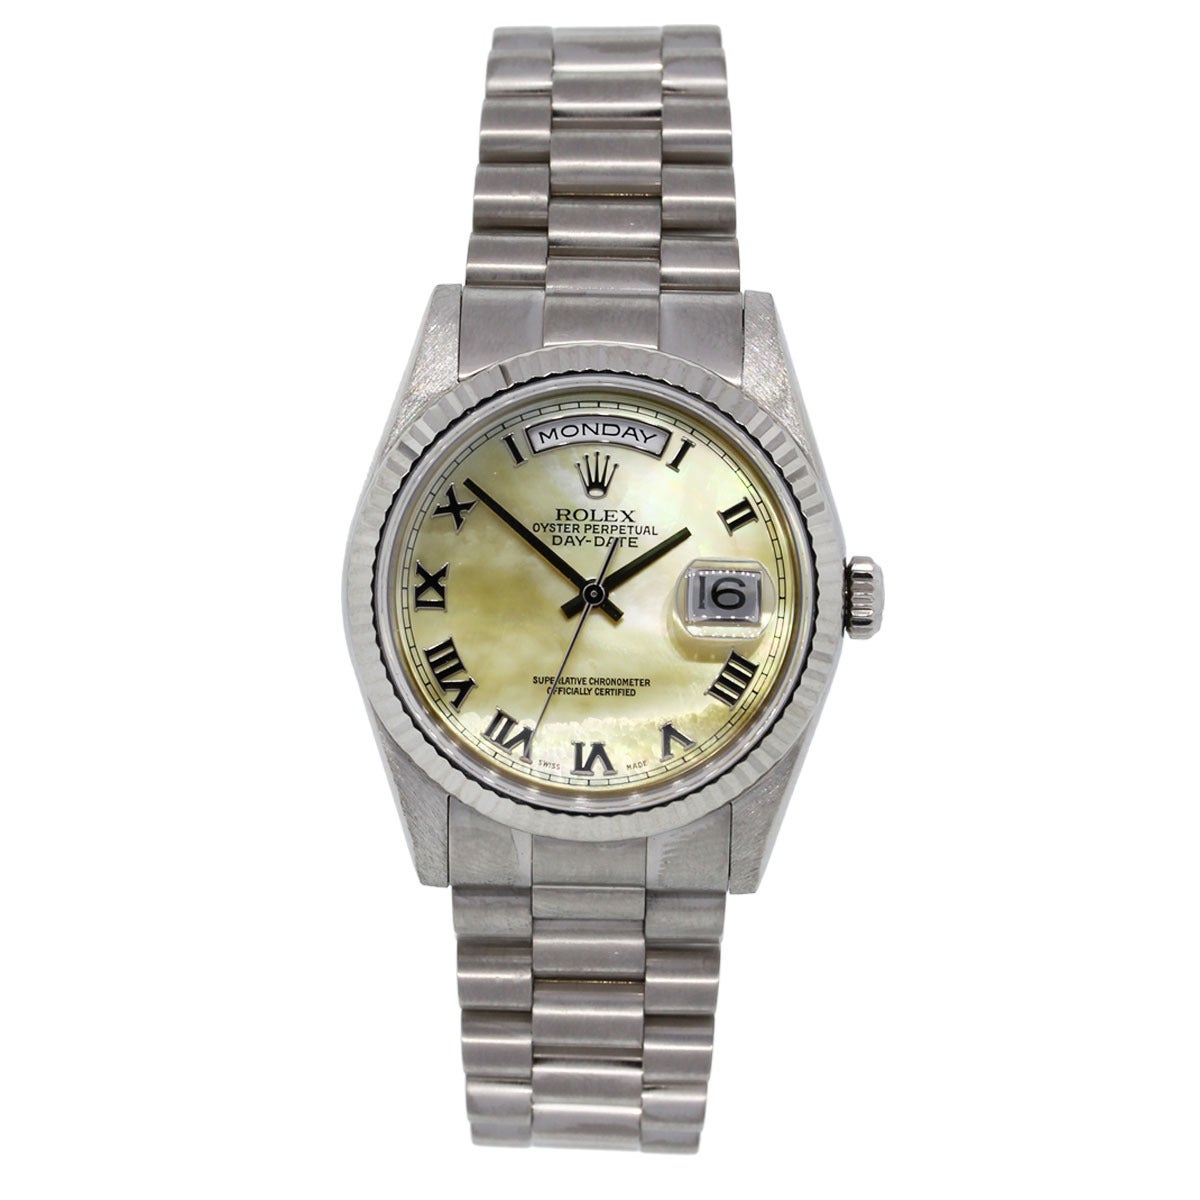 Brand: Rolex
Reference: 118239
Case Material: 18k White Gold
Movement: Automatic
Case Measurement: 36mm
Dial: Mother of Pearl (factory)
Crystal: Scratch Resistant Sapphire
Clasp: Fold Over Clasp
Size: Will Fit a 7.25